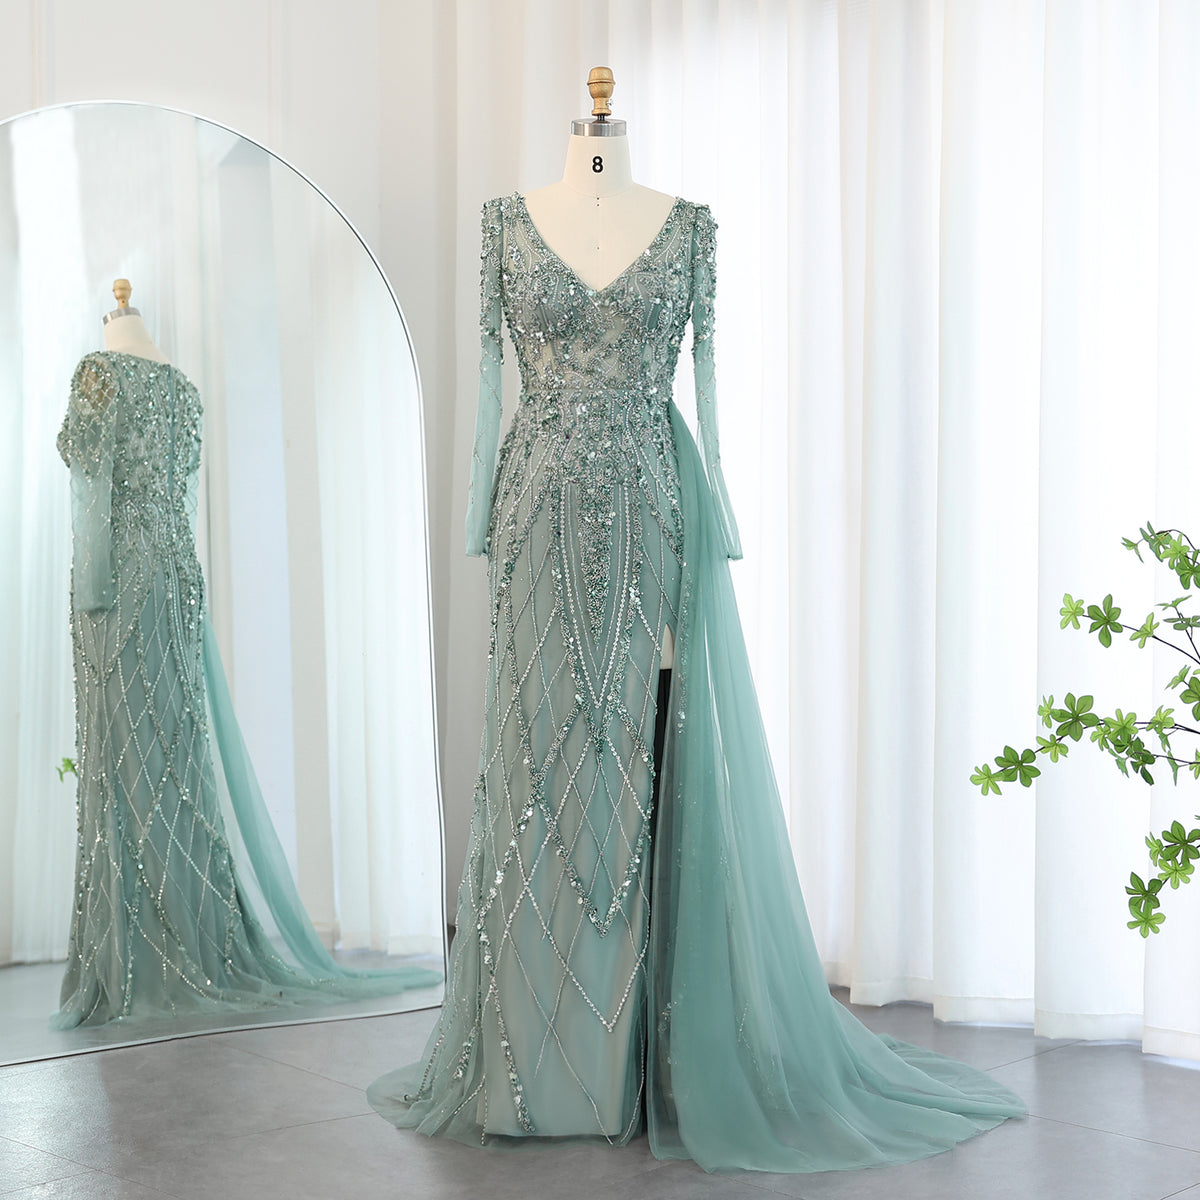 Sharon Said Turquoise Green Meramid Long Sleeves Evening Dress with Overskirt High Slit Luxury For Women Wedding Party SS181